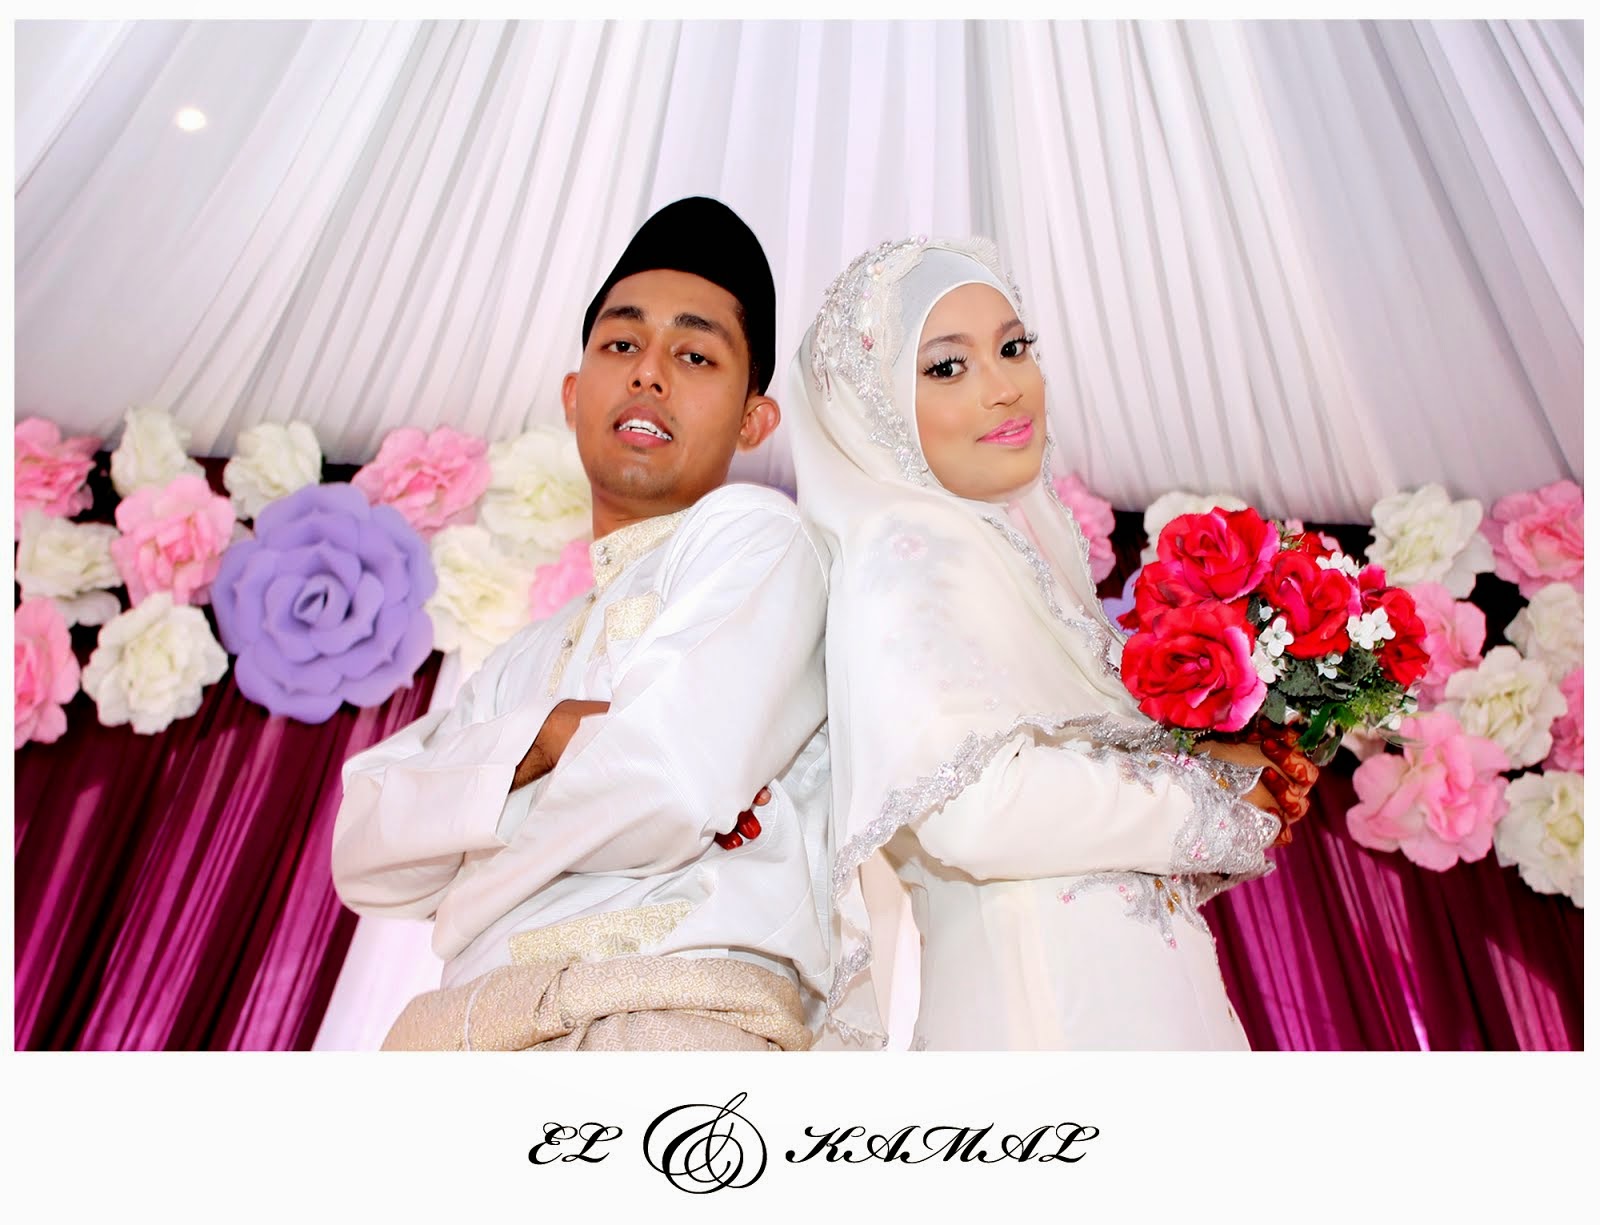 Fotografi for wedding, anual dinner, private function n etc.